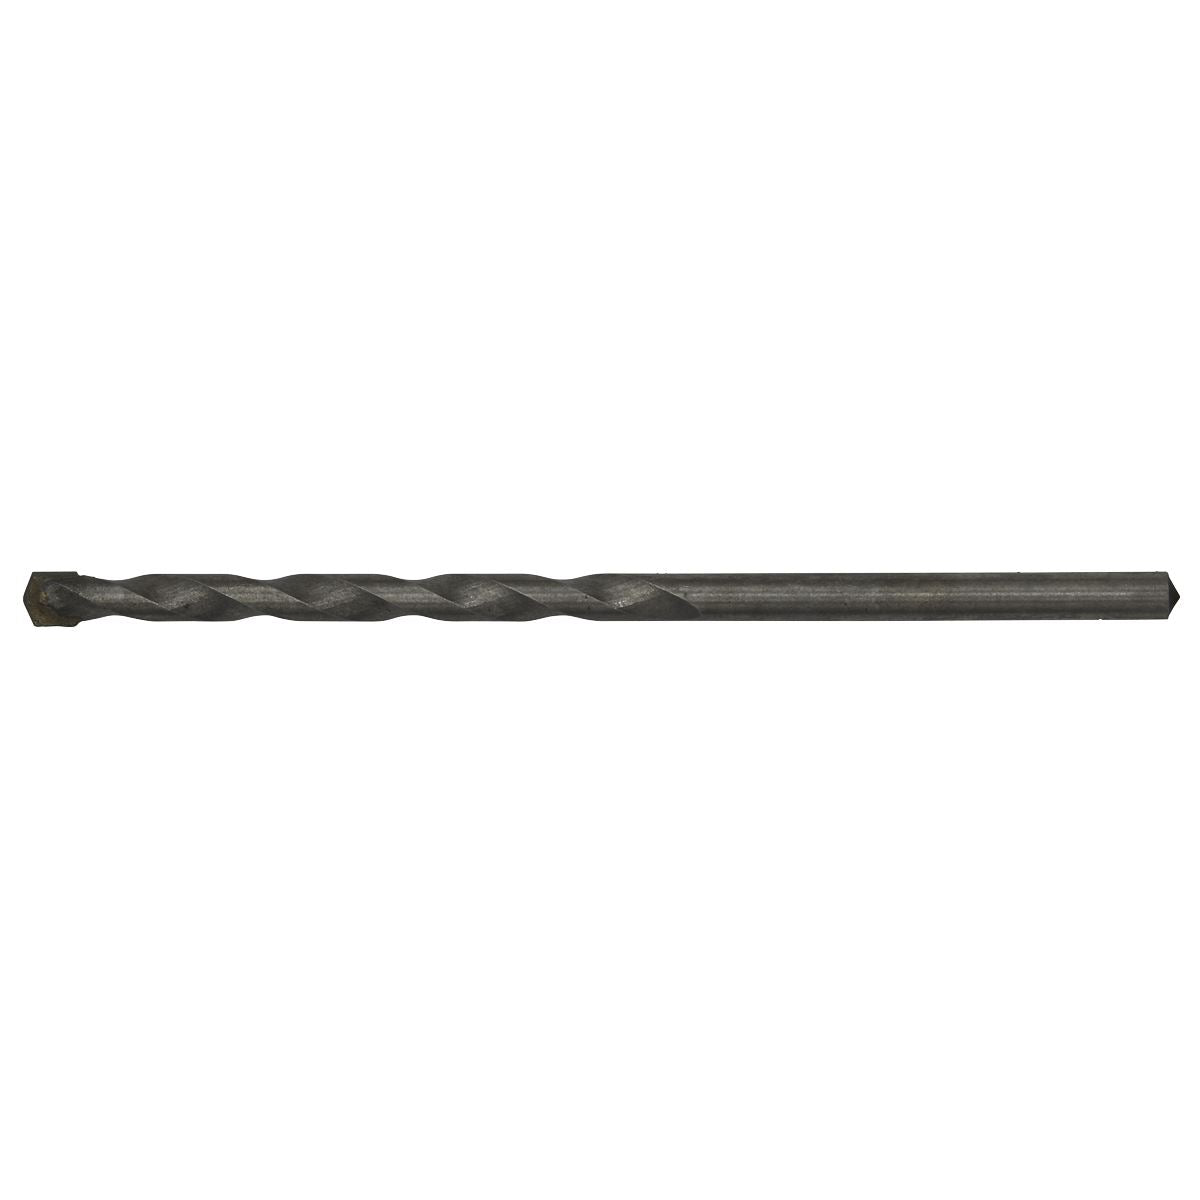 Worksafe by Sealey Straight Shank Rotary Impact Drill Bit Ø4 x 85mm